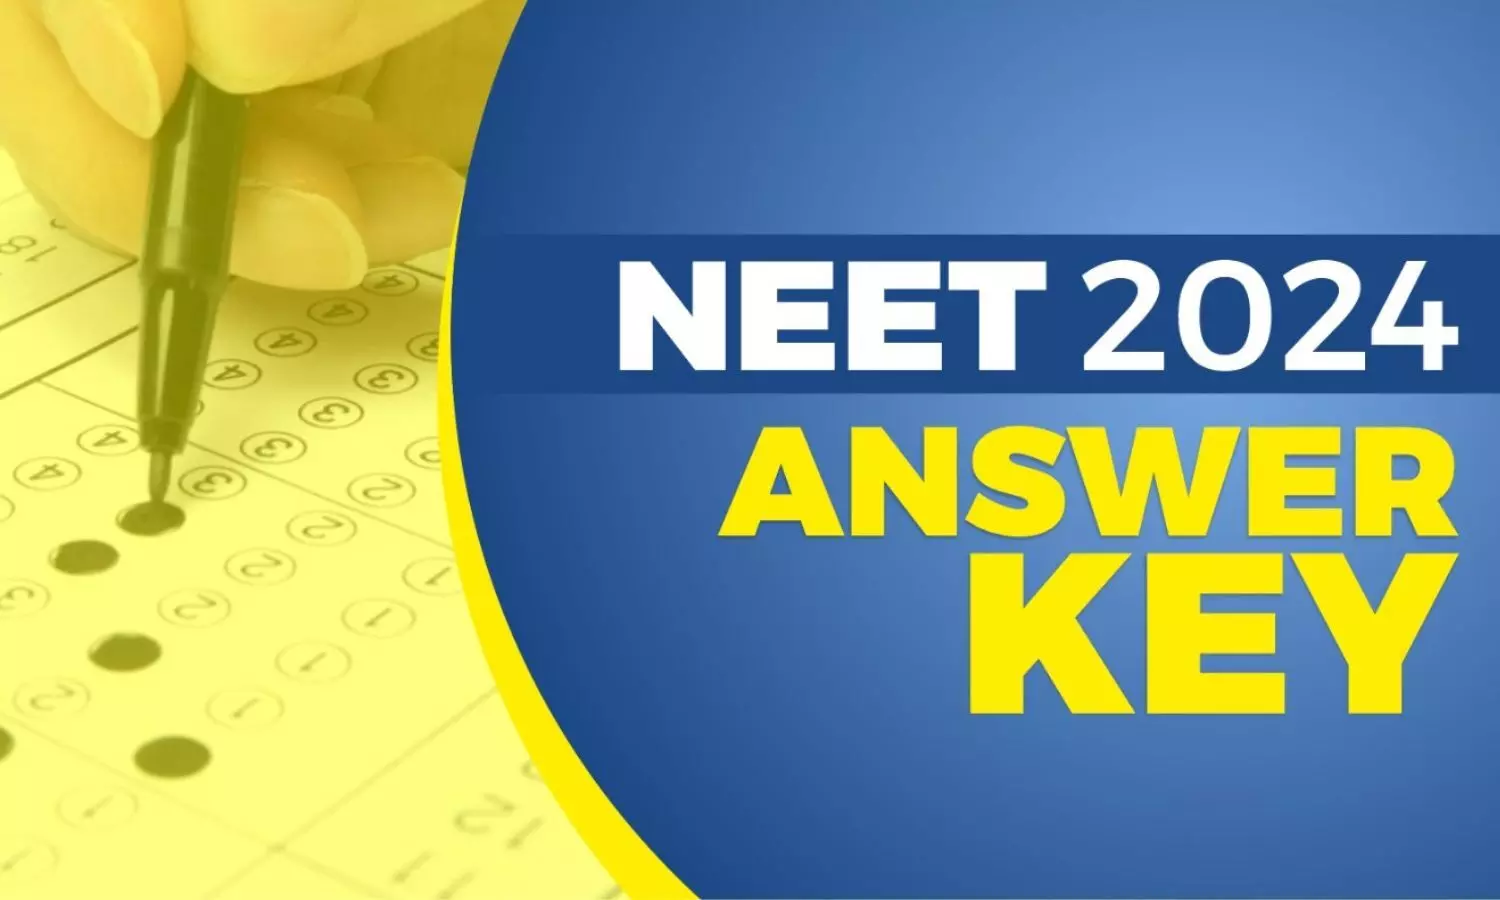 NEET 2024 - Official answer key, OMR sheet expected early June